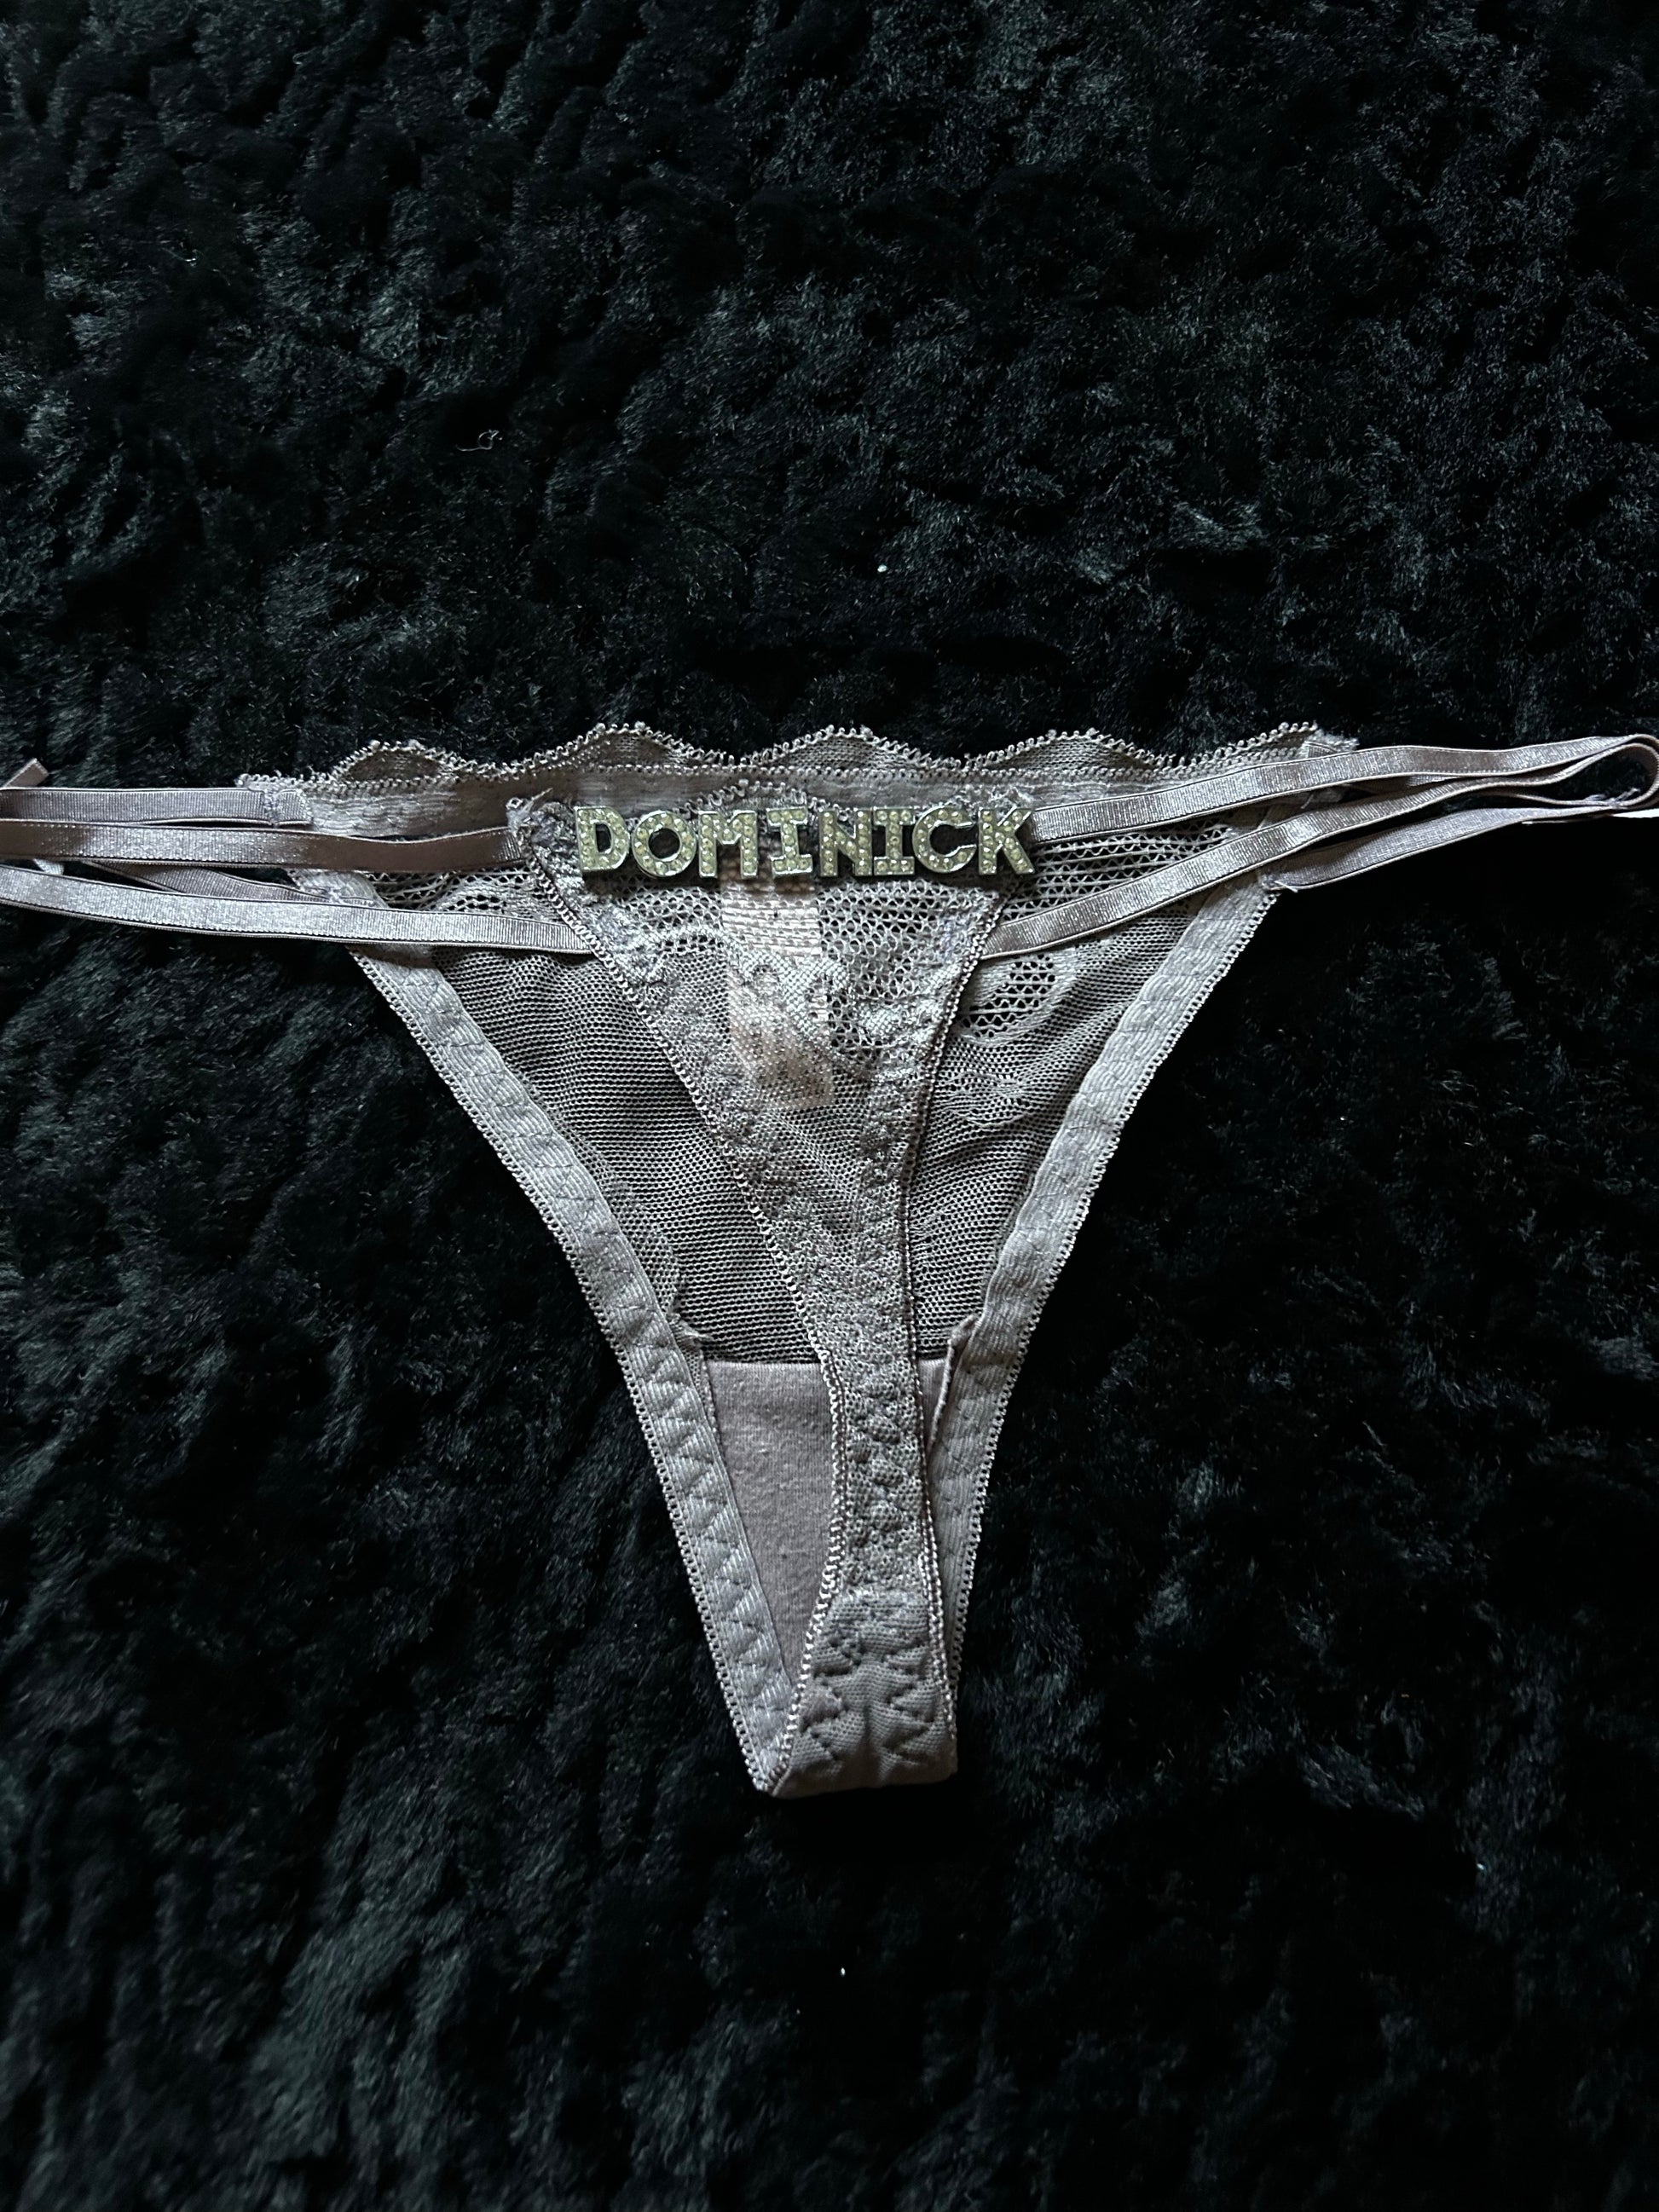 Name Thong,custom Lace Thongs,personalized Valentine's Day Gift